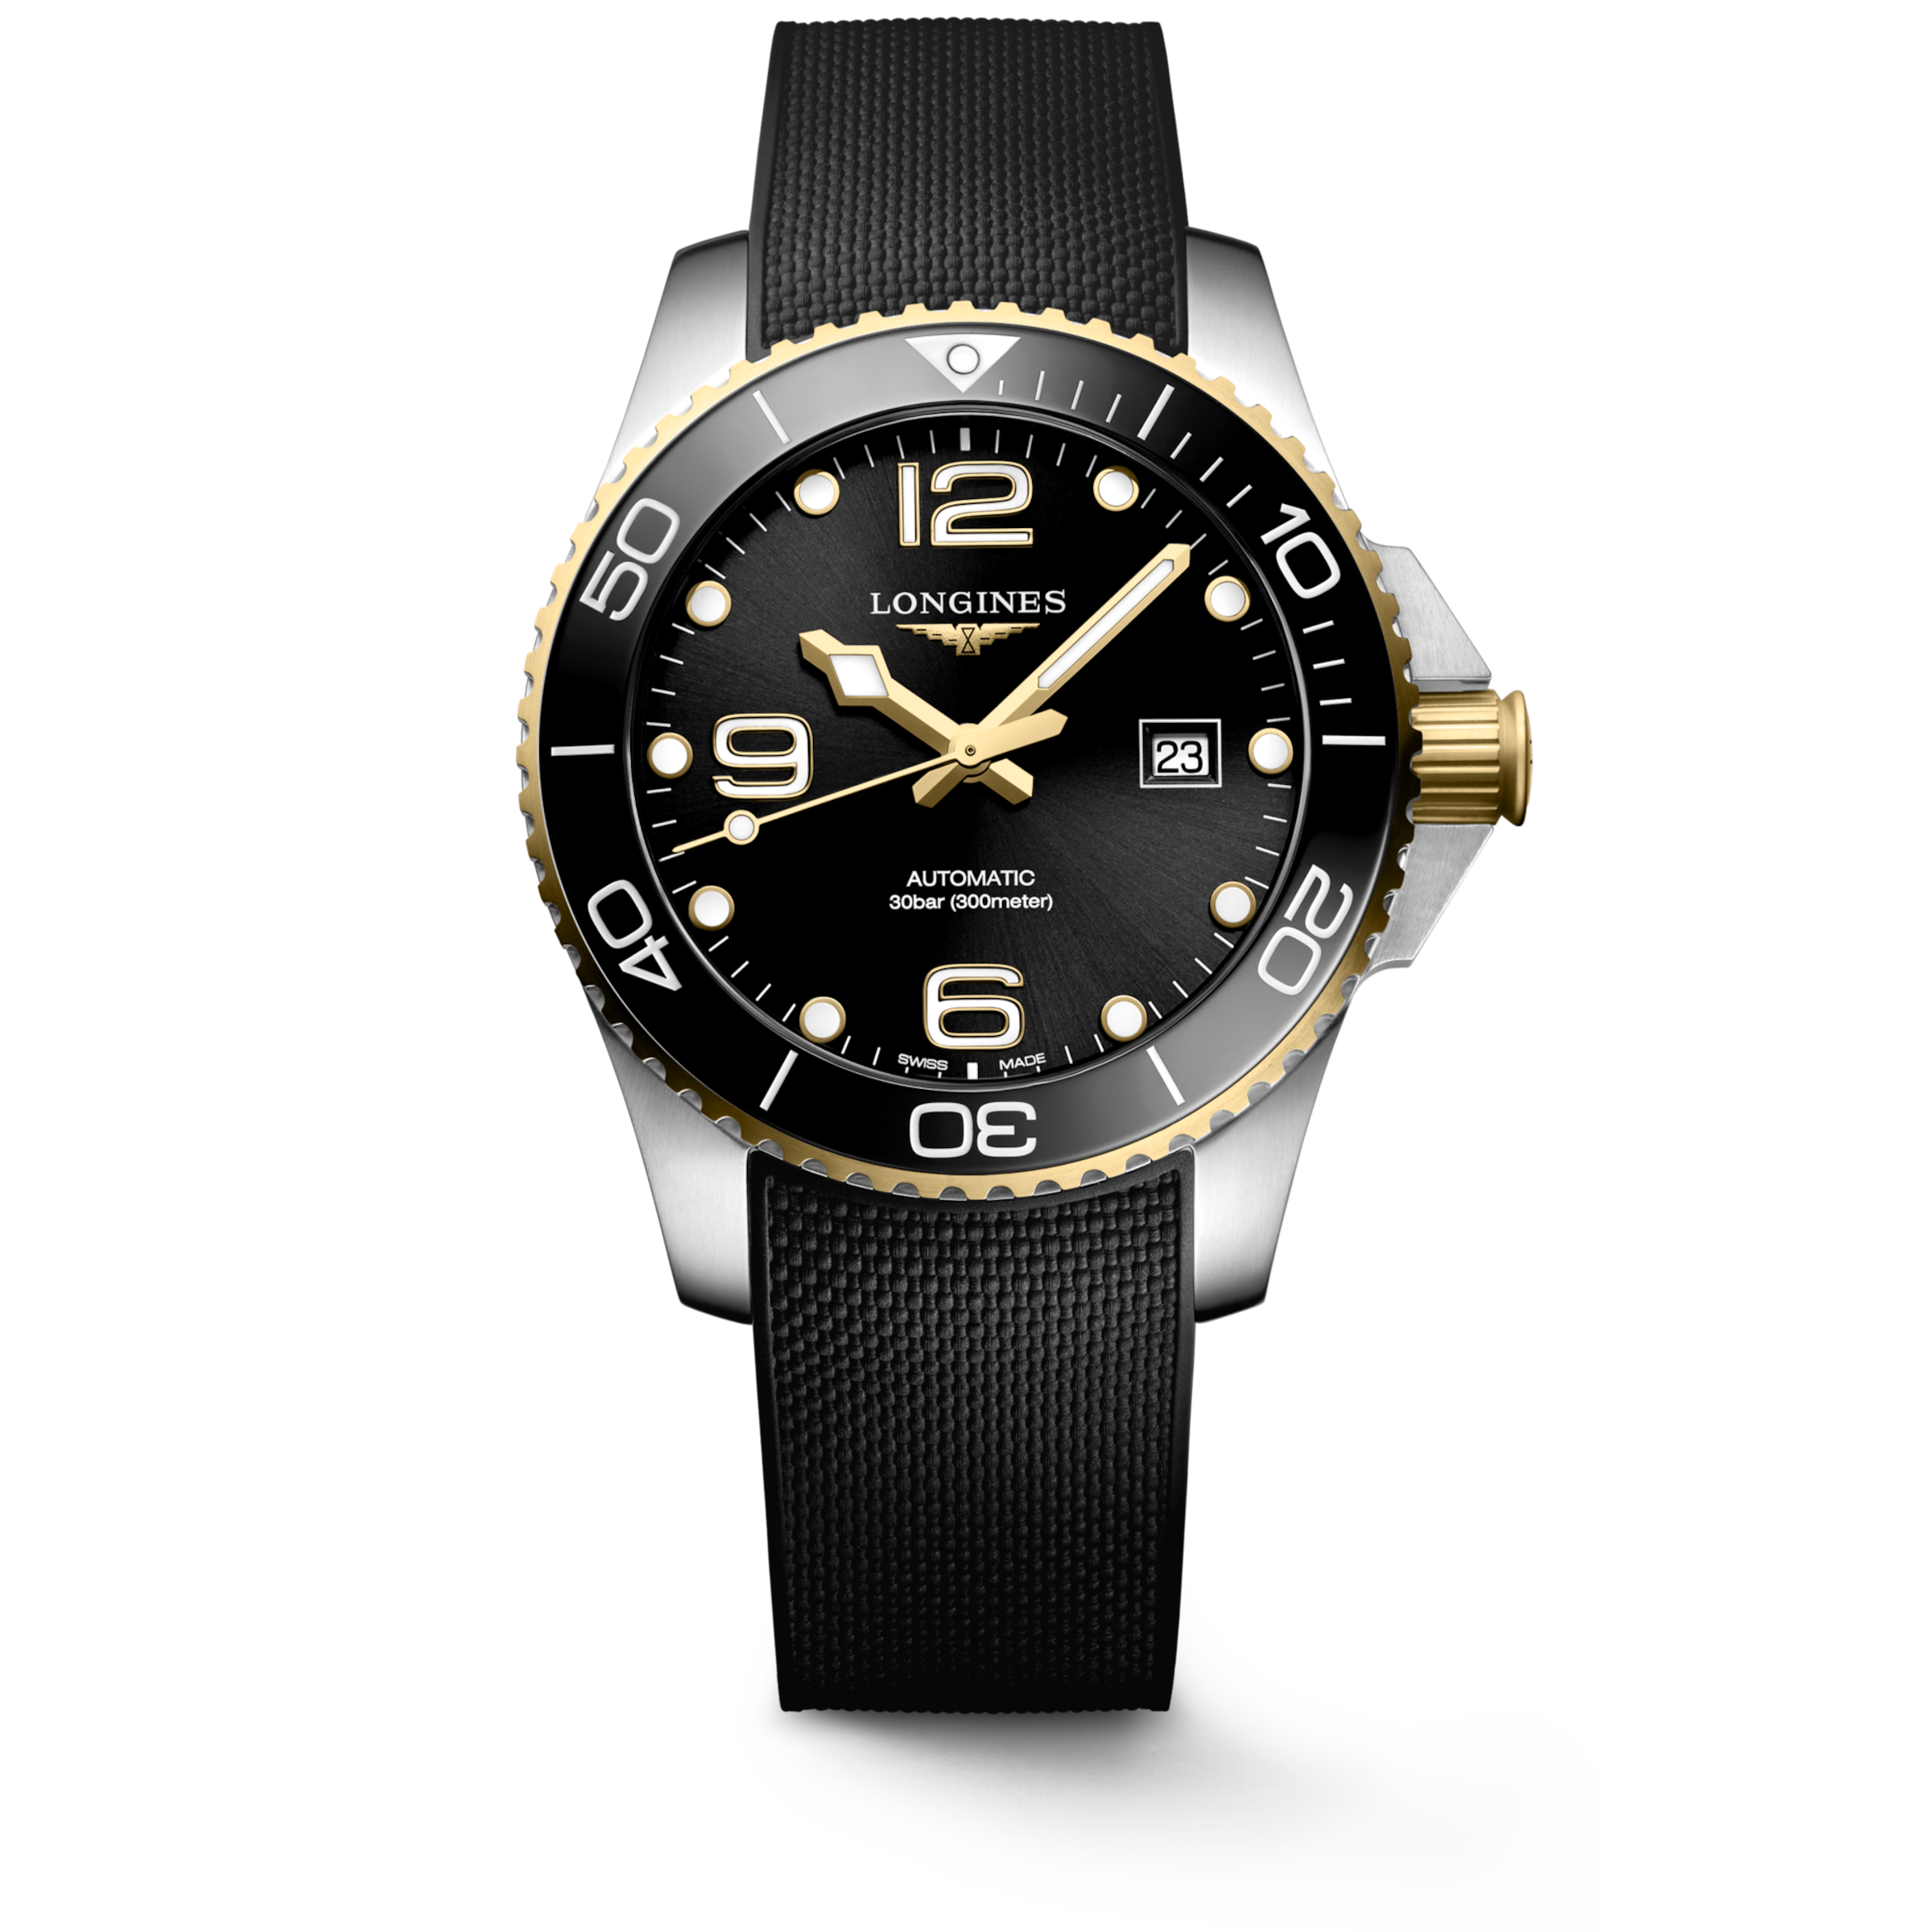 Longines HYDROCONQUEST Automatic Stainless steel and ceramic bezel Watch - L3.782.3.56.9